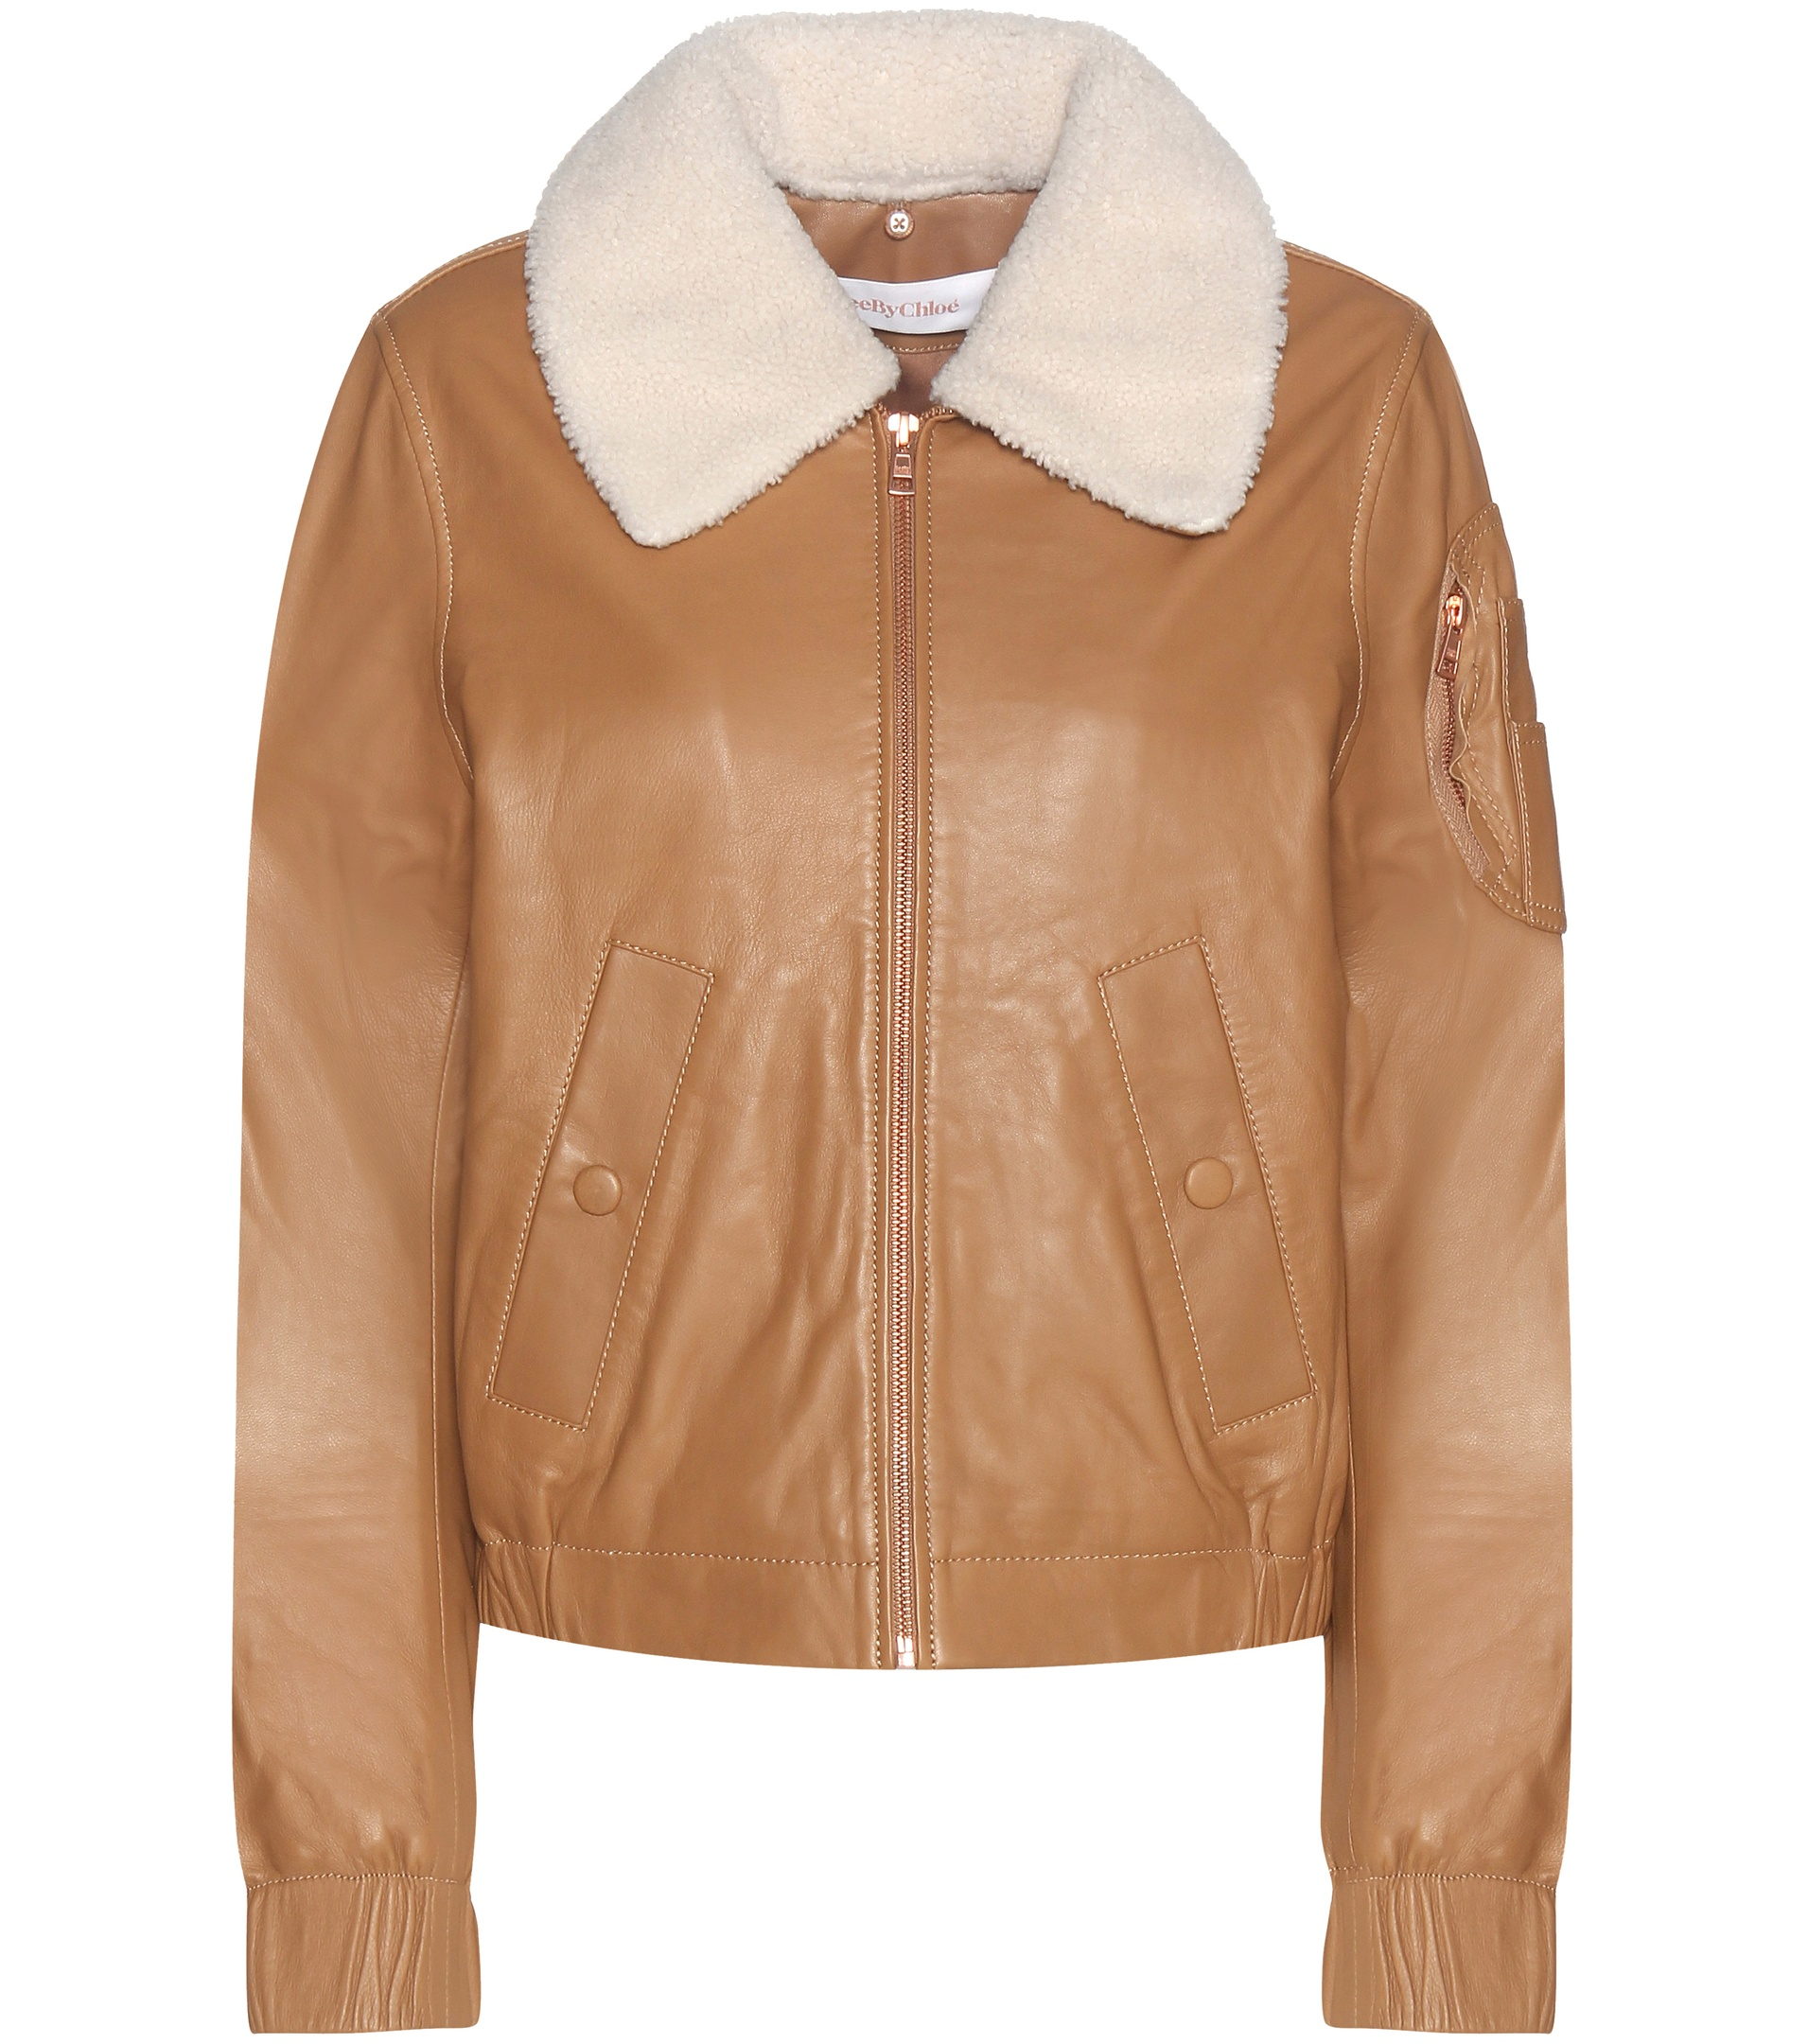 Lyst - See By Chloé Leather Bomber Jacket With Shearling Collar in Brown